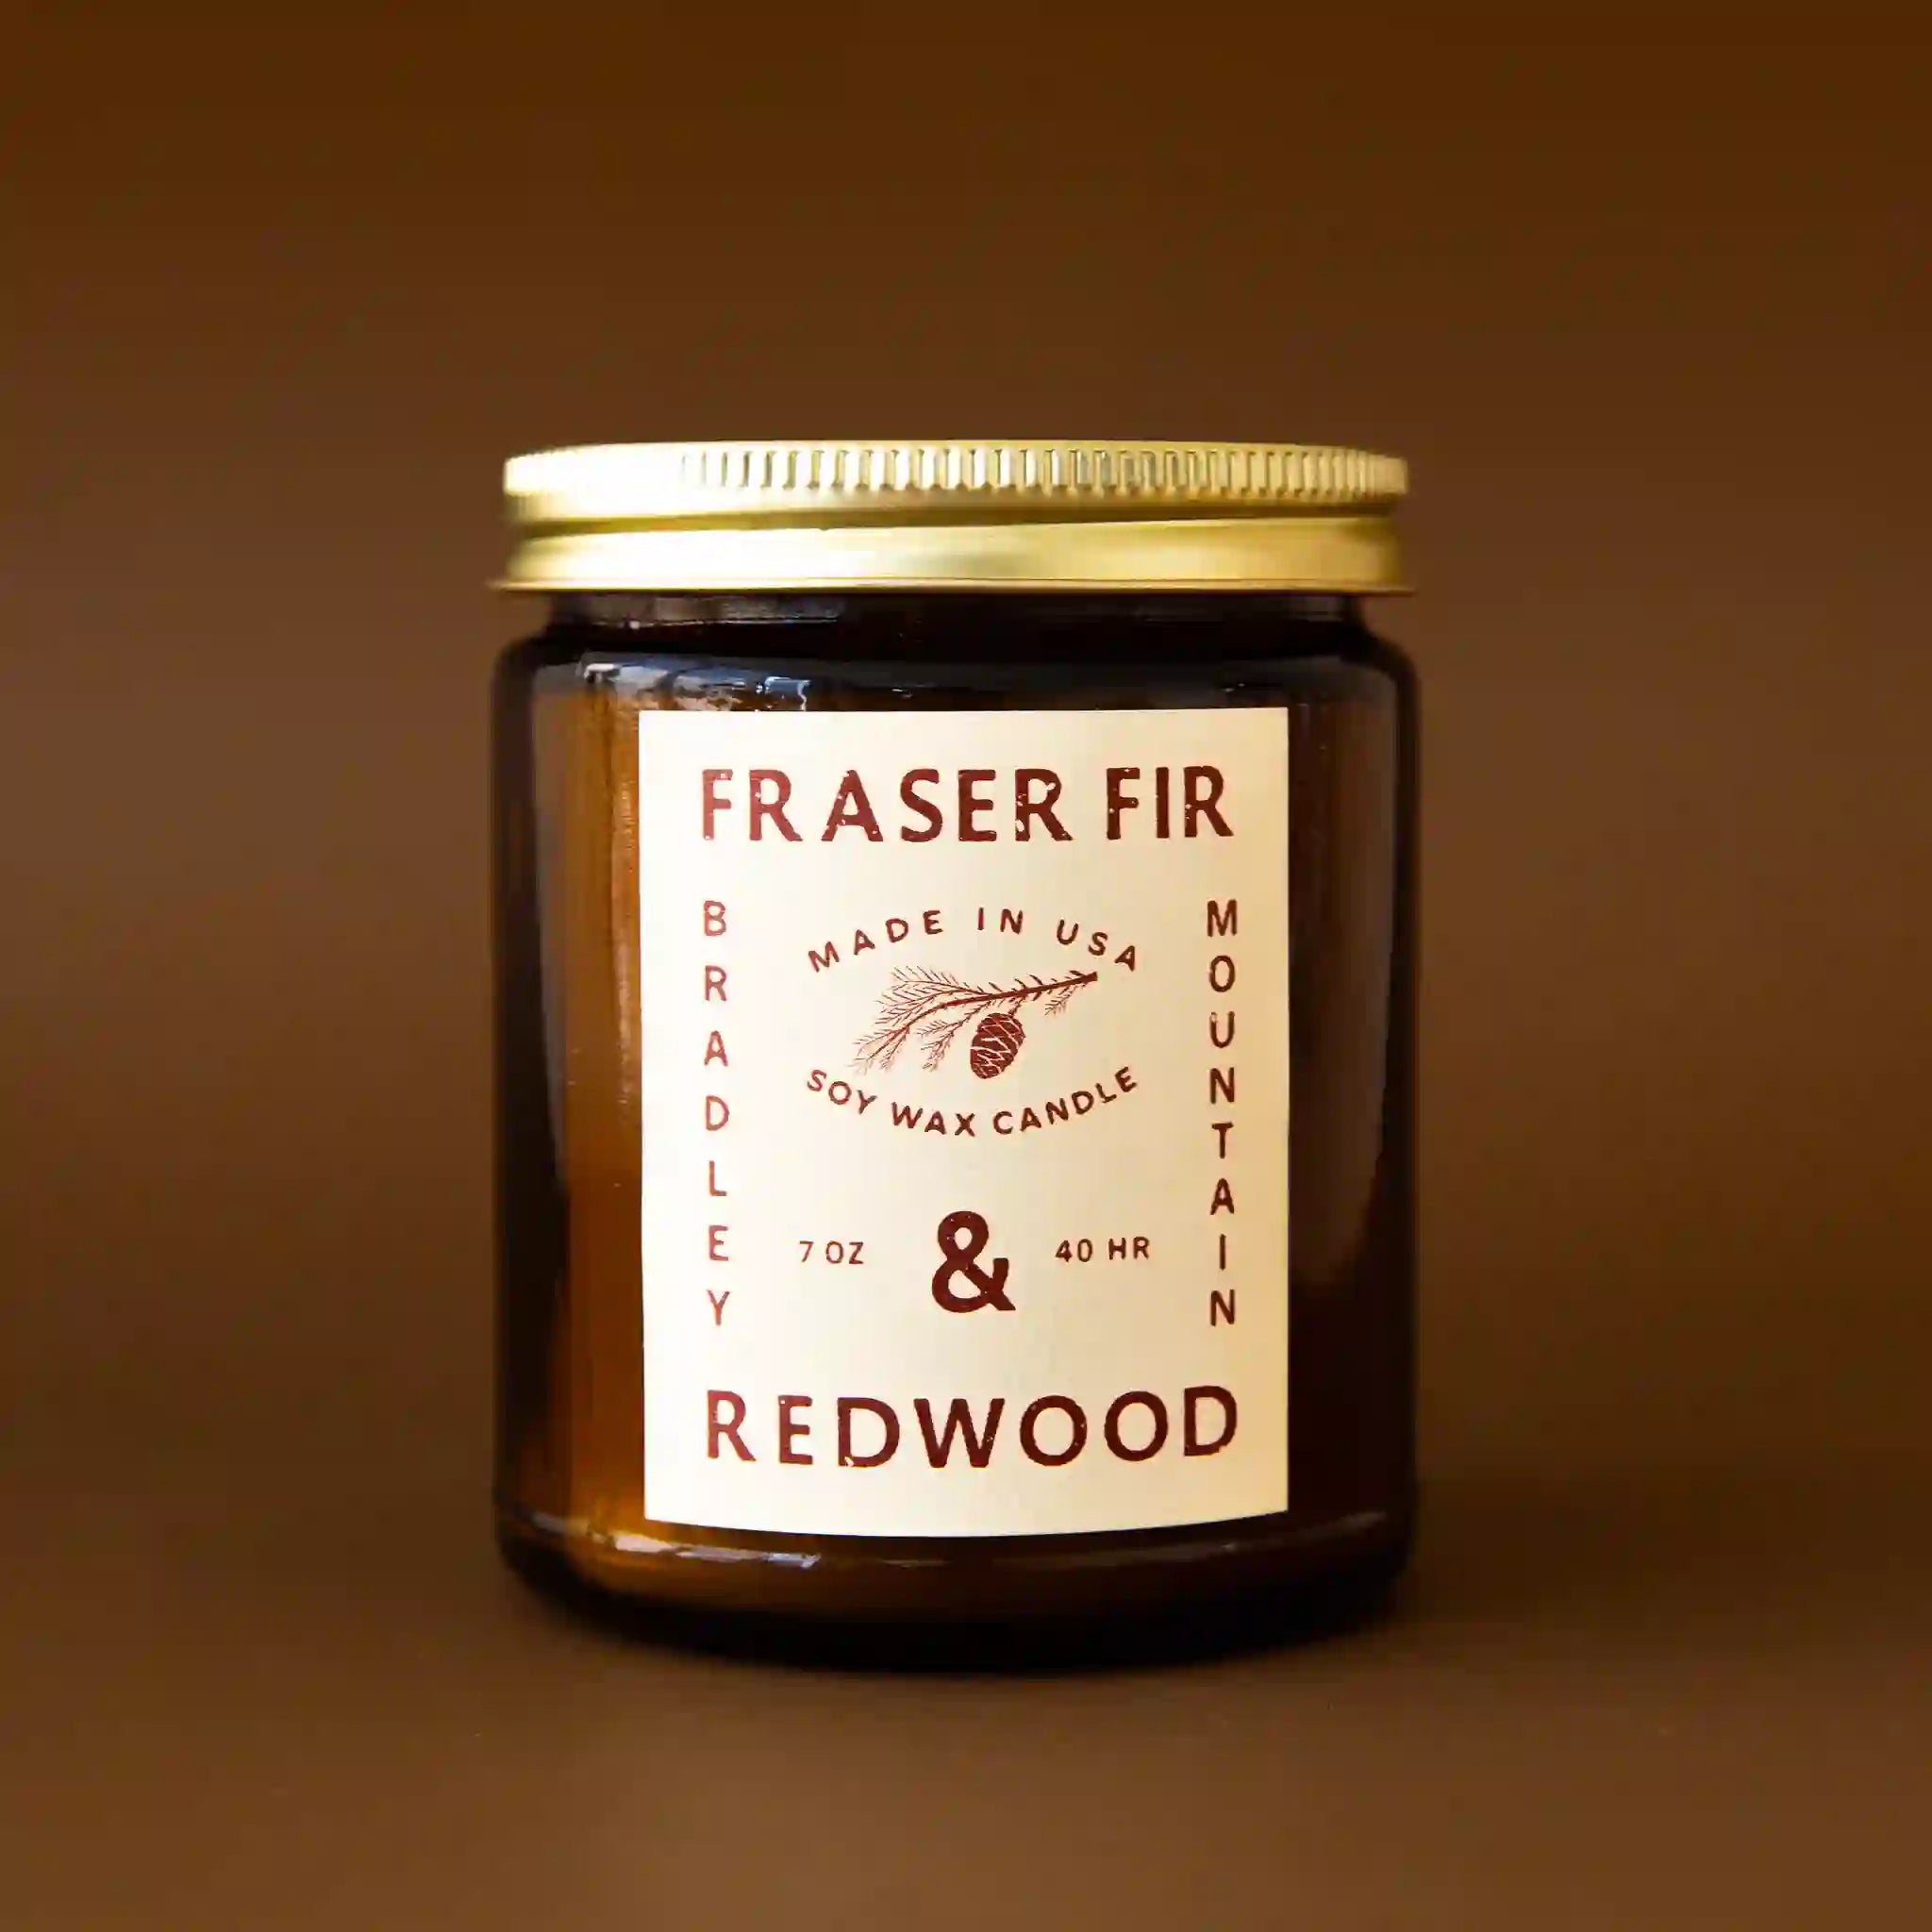 On a brown background is an amber brown glass candle jar with a tan label that reads, "Fraser Fir & Redwood".